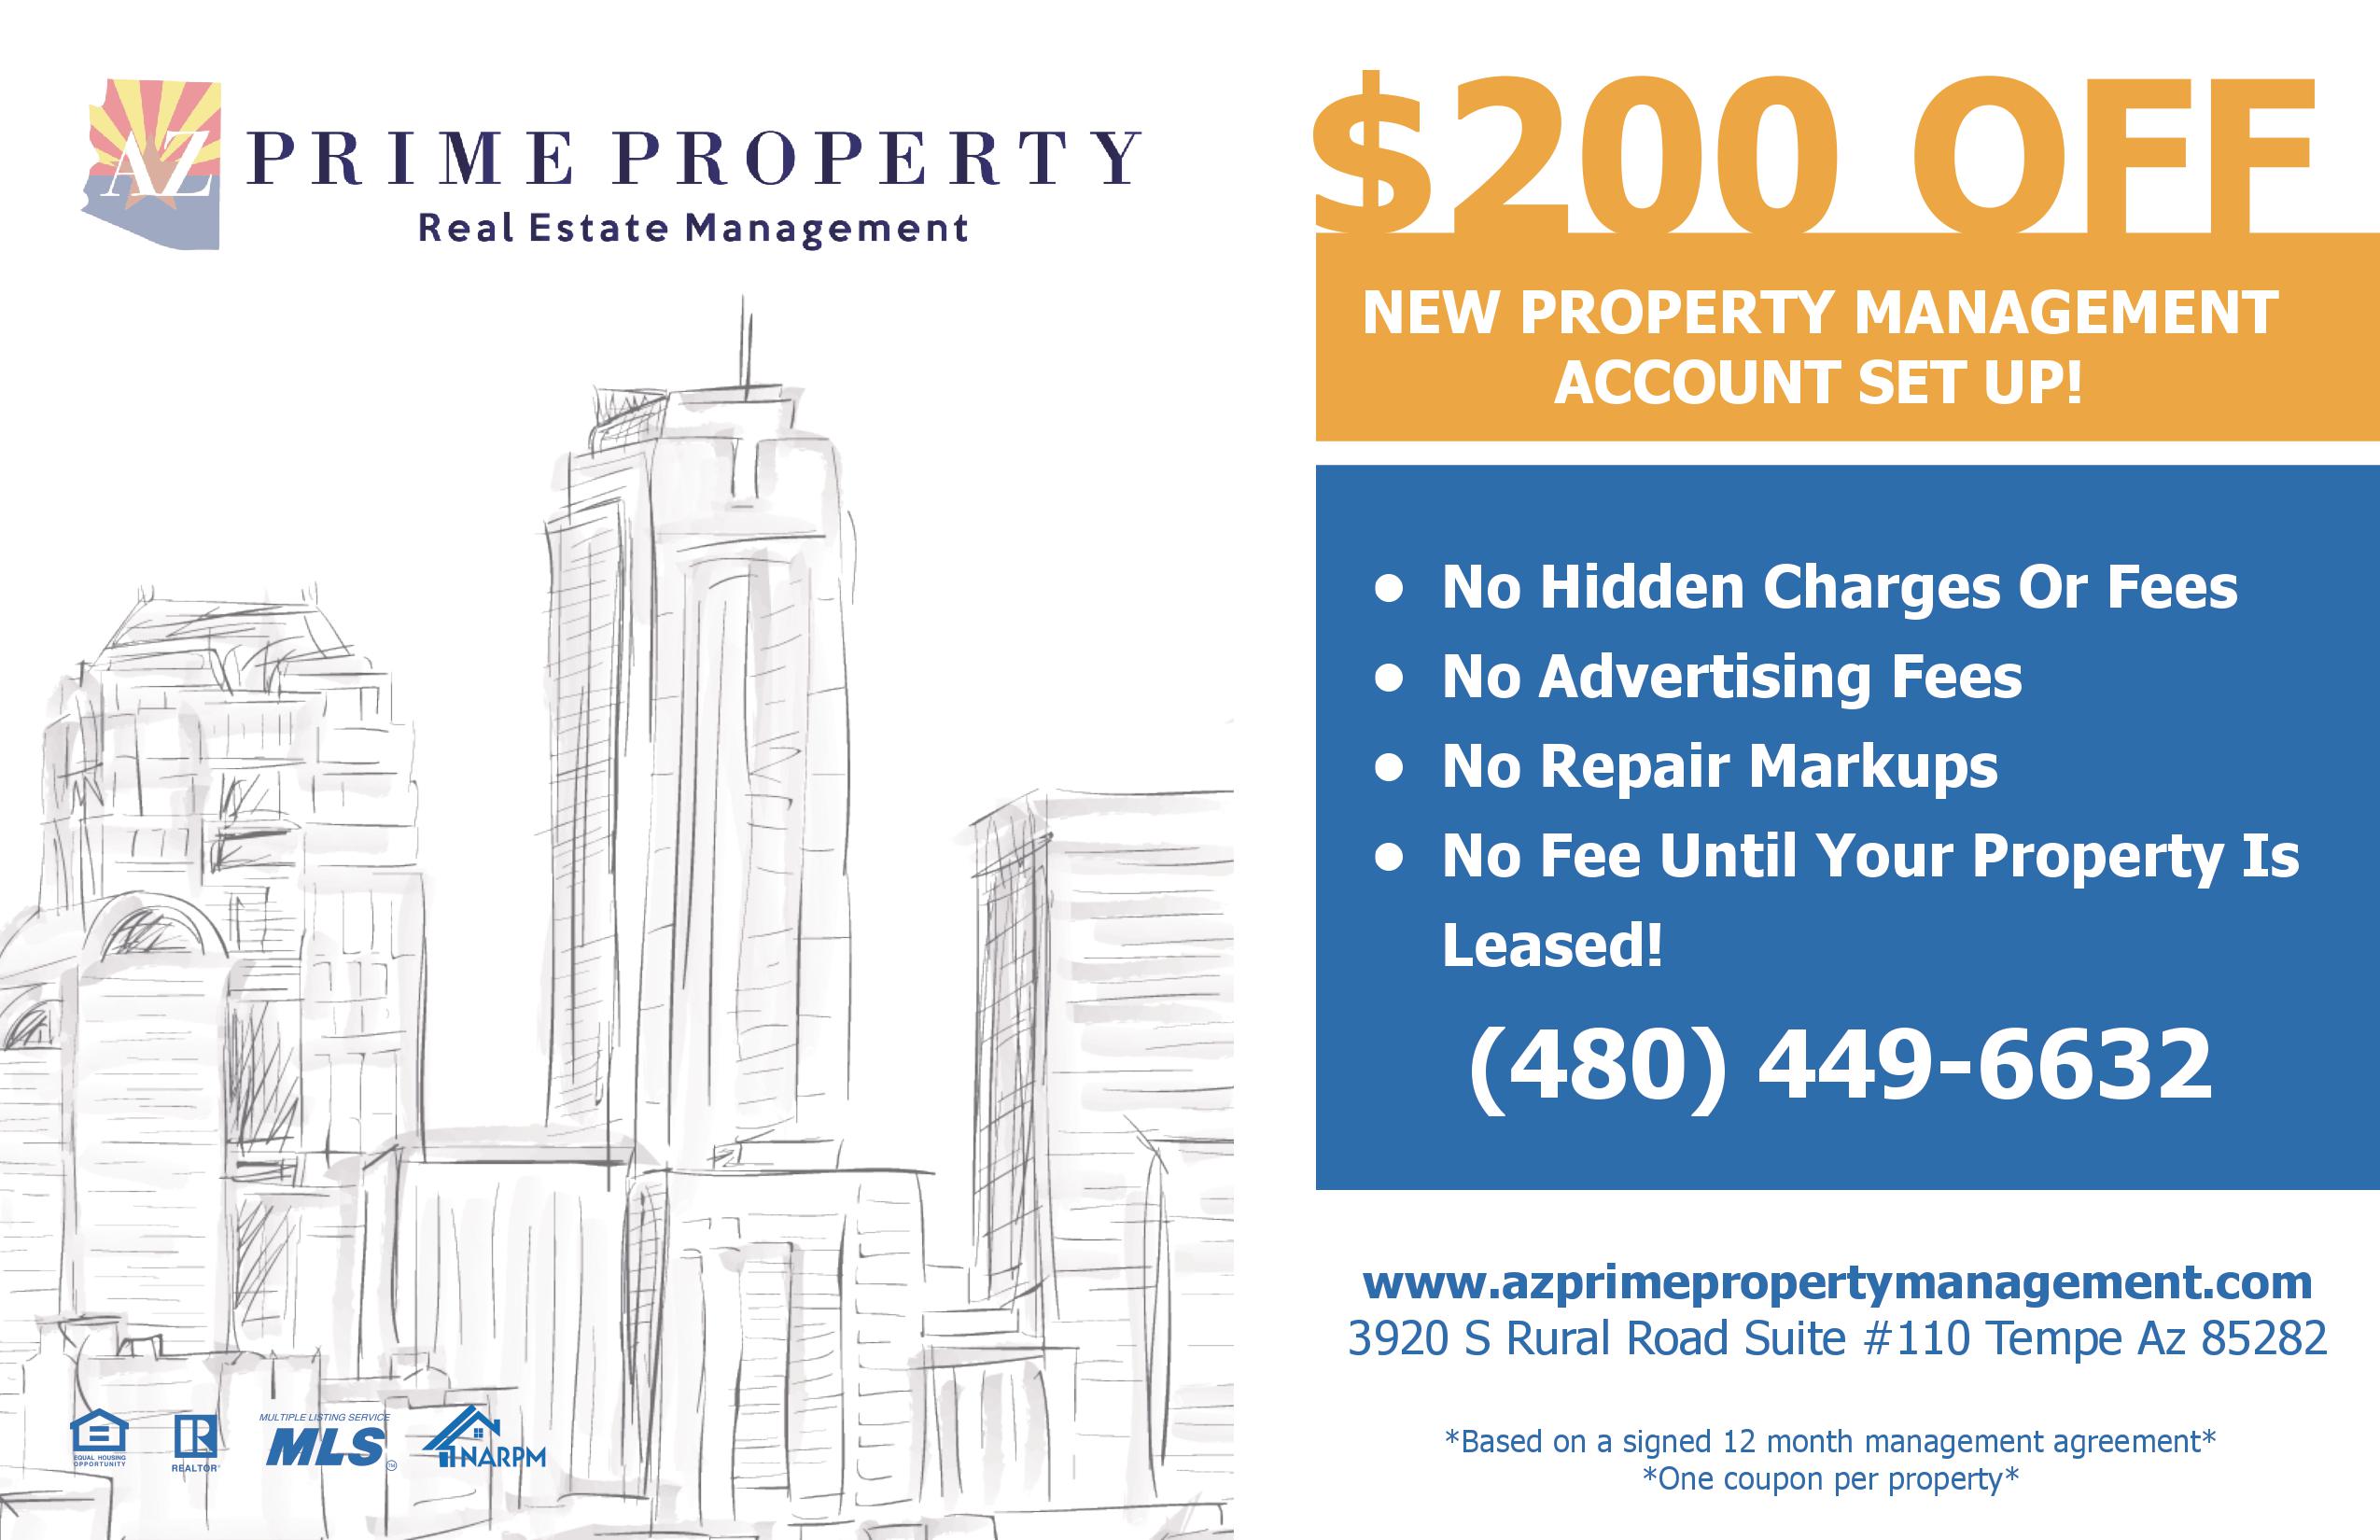 A promotional image boasting $200 off a property management account set up. With a provided (480) 449-6632 phone number to call.